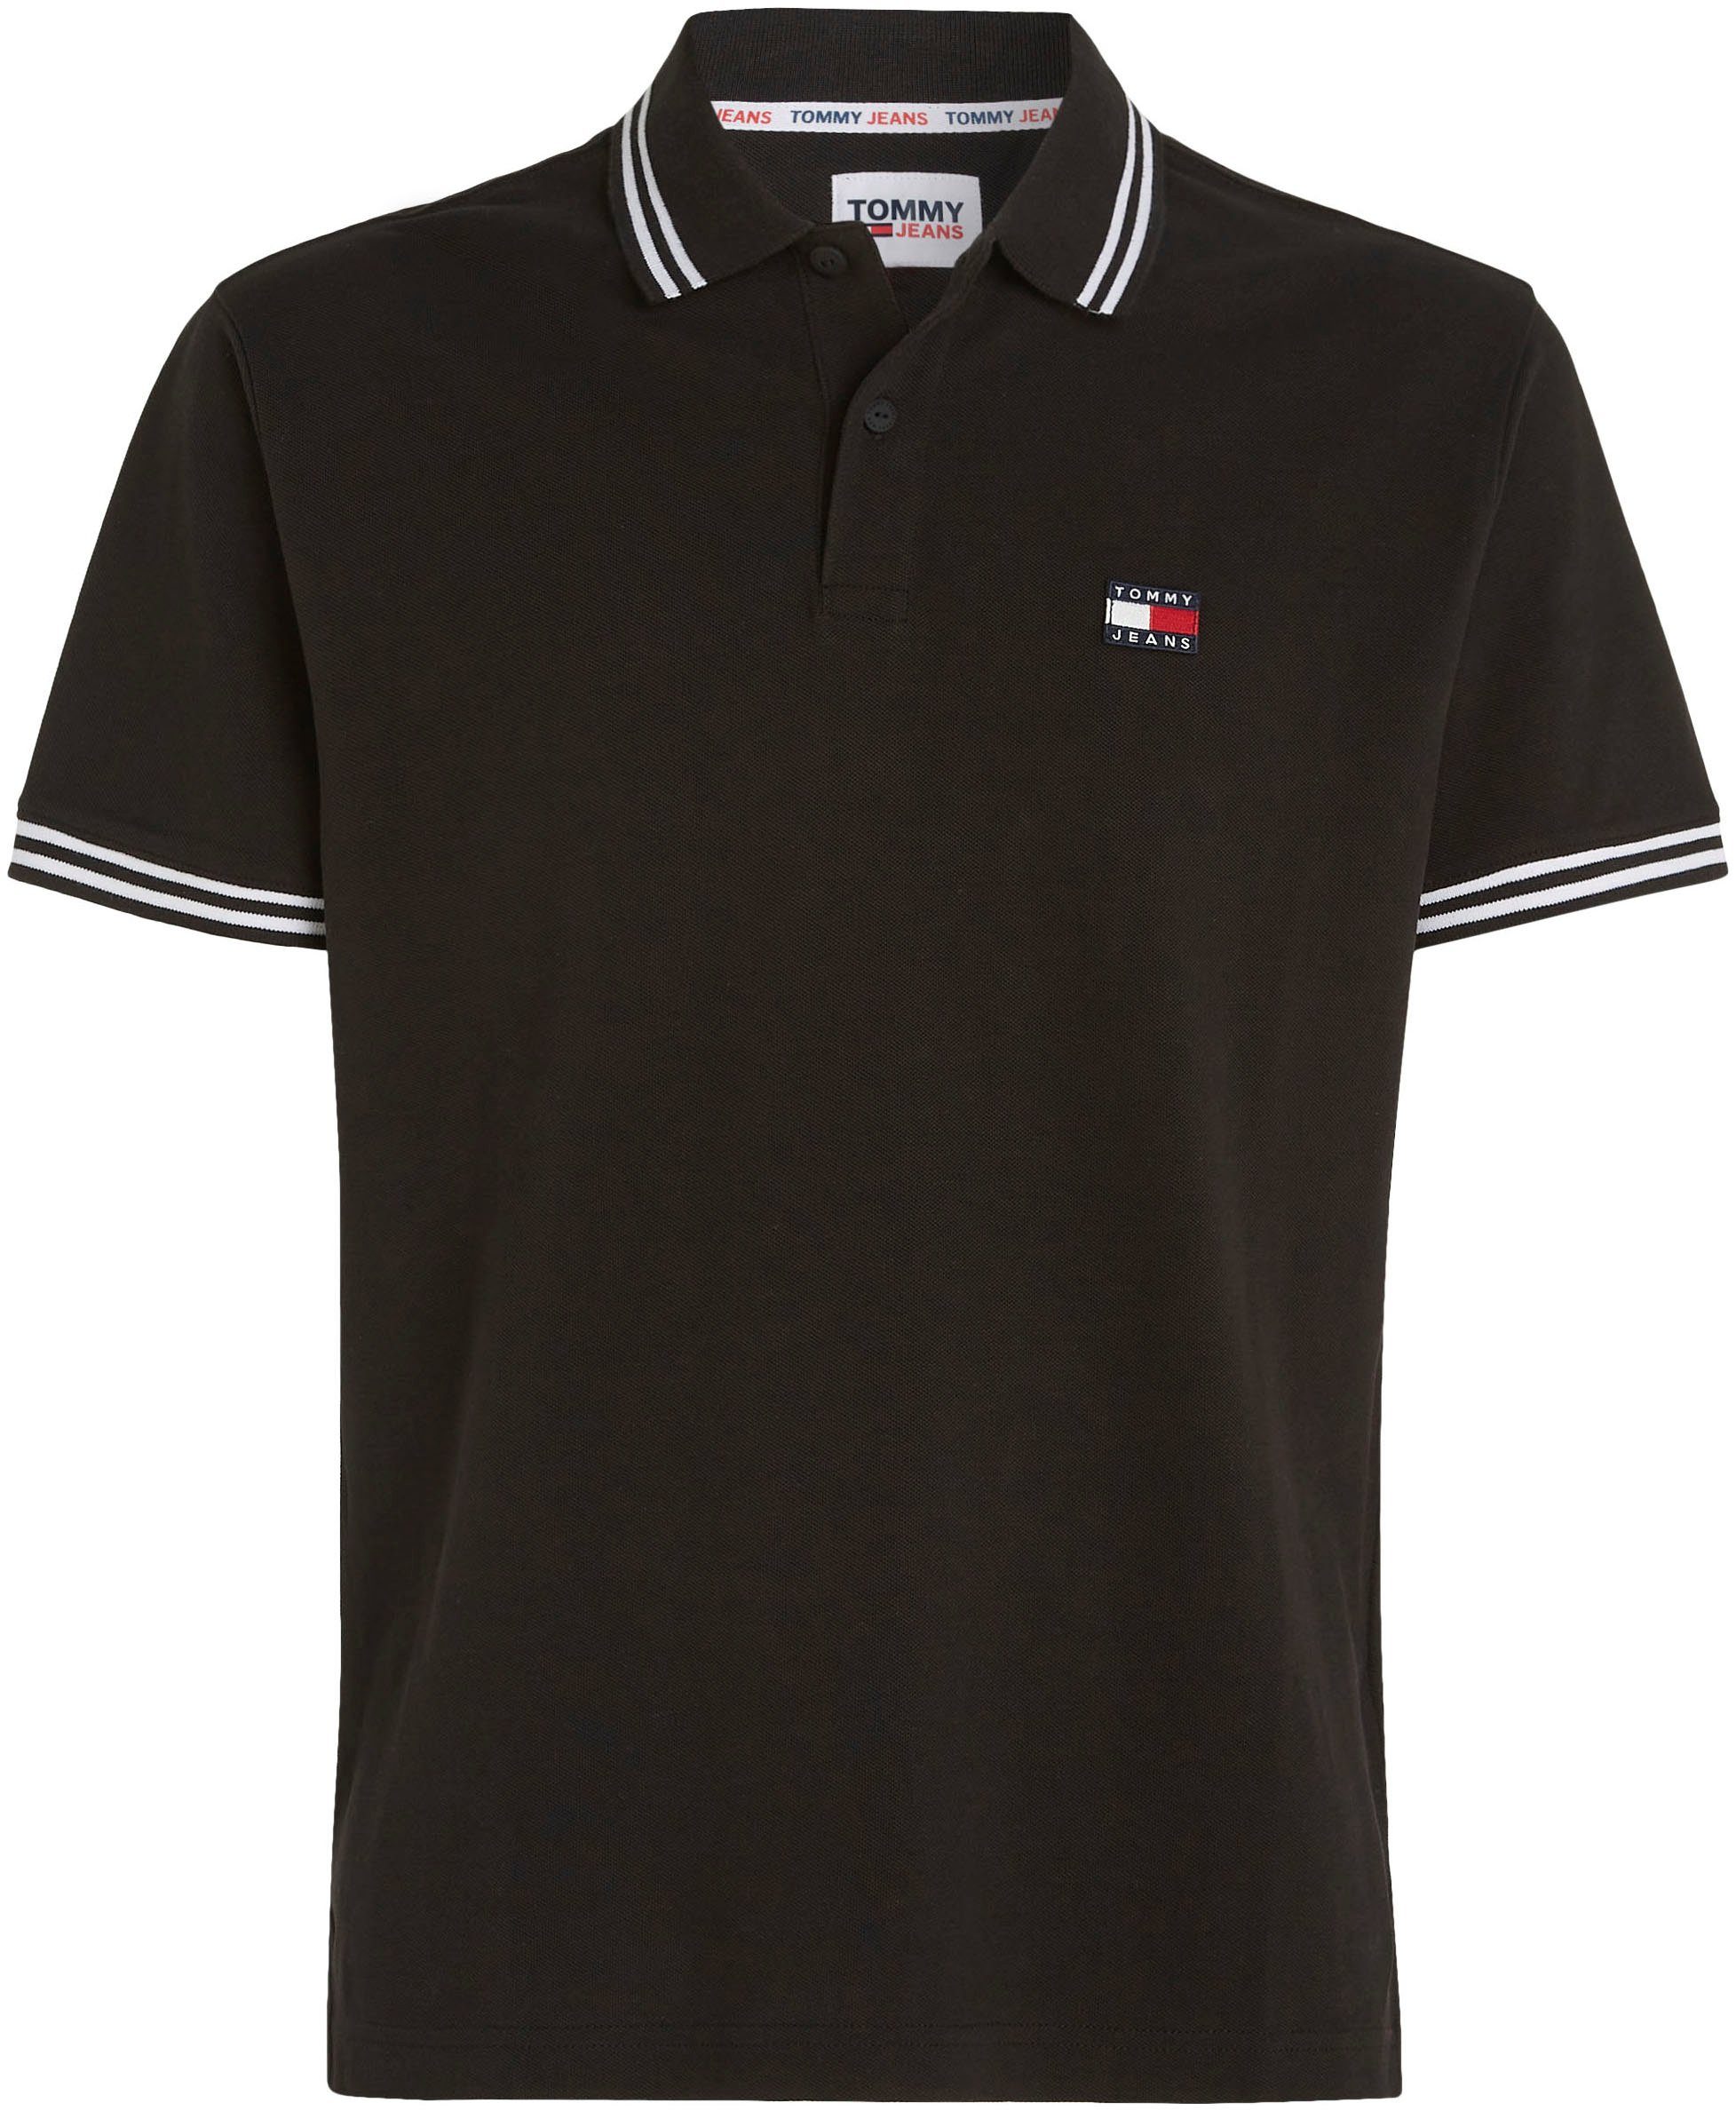 TJM TIPPING Black Jeans CLSC DETAIL Tommy POLO Poloshirt